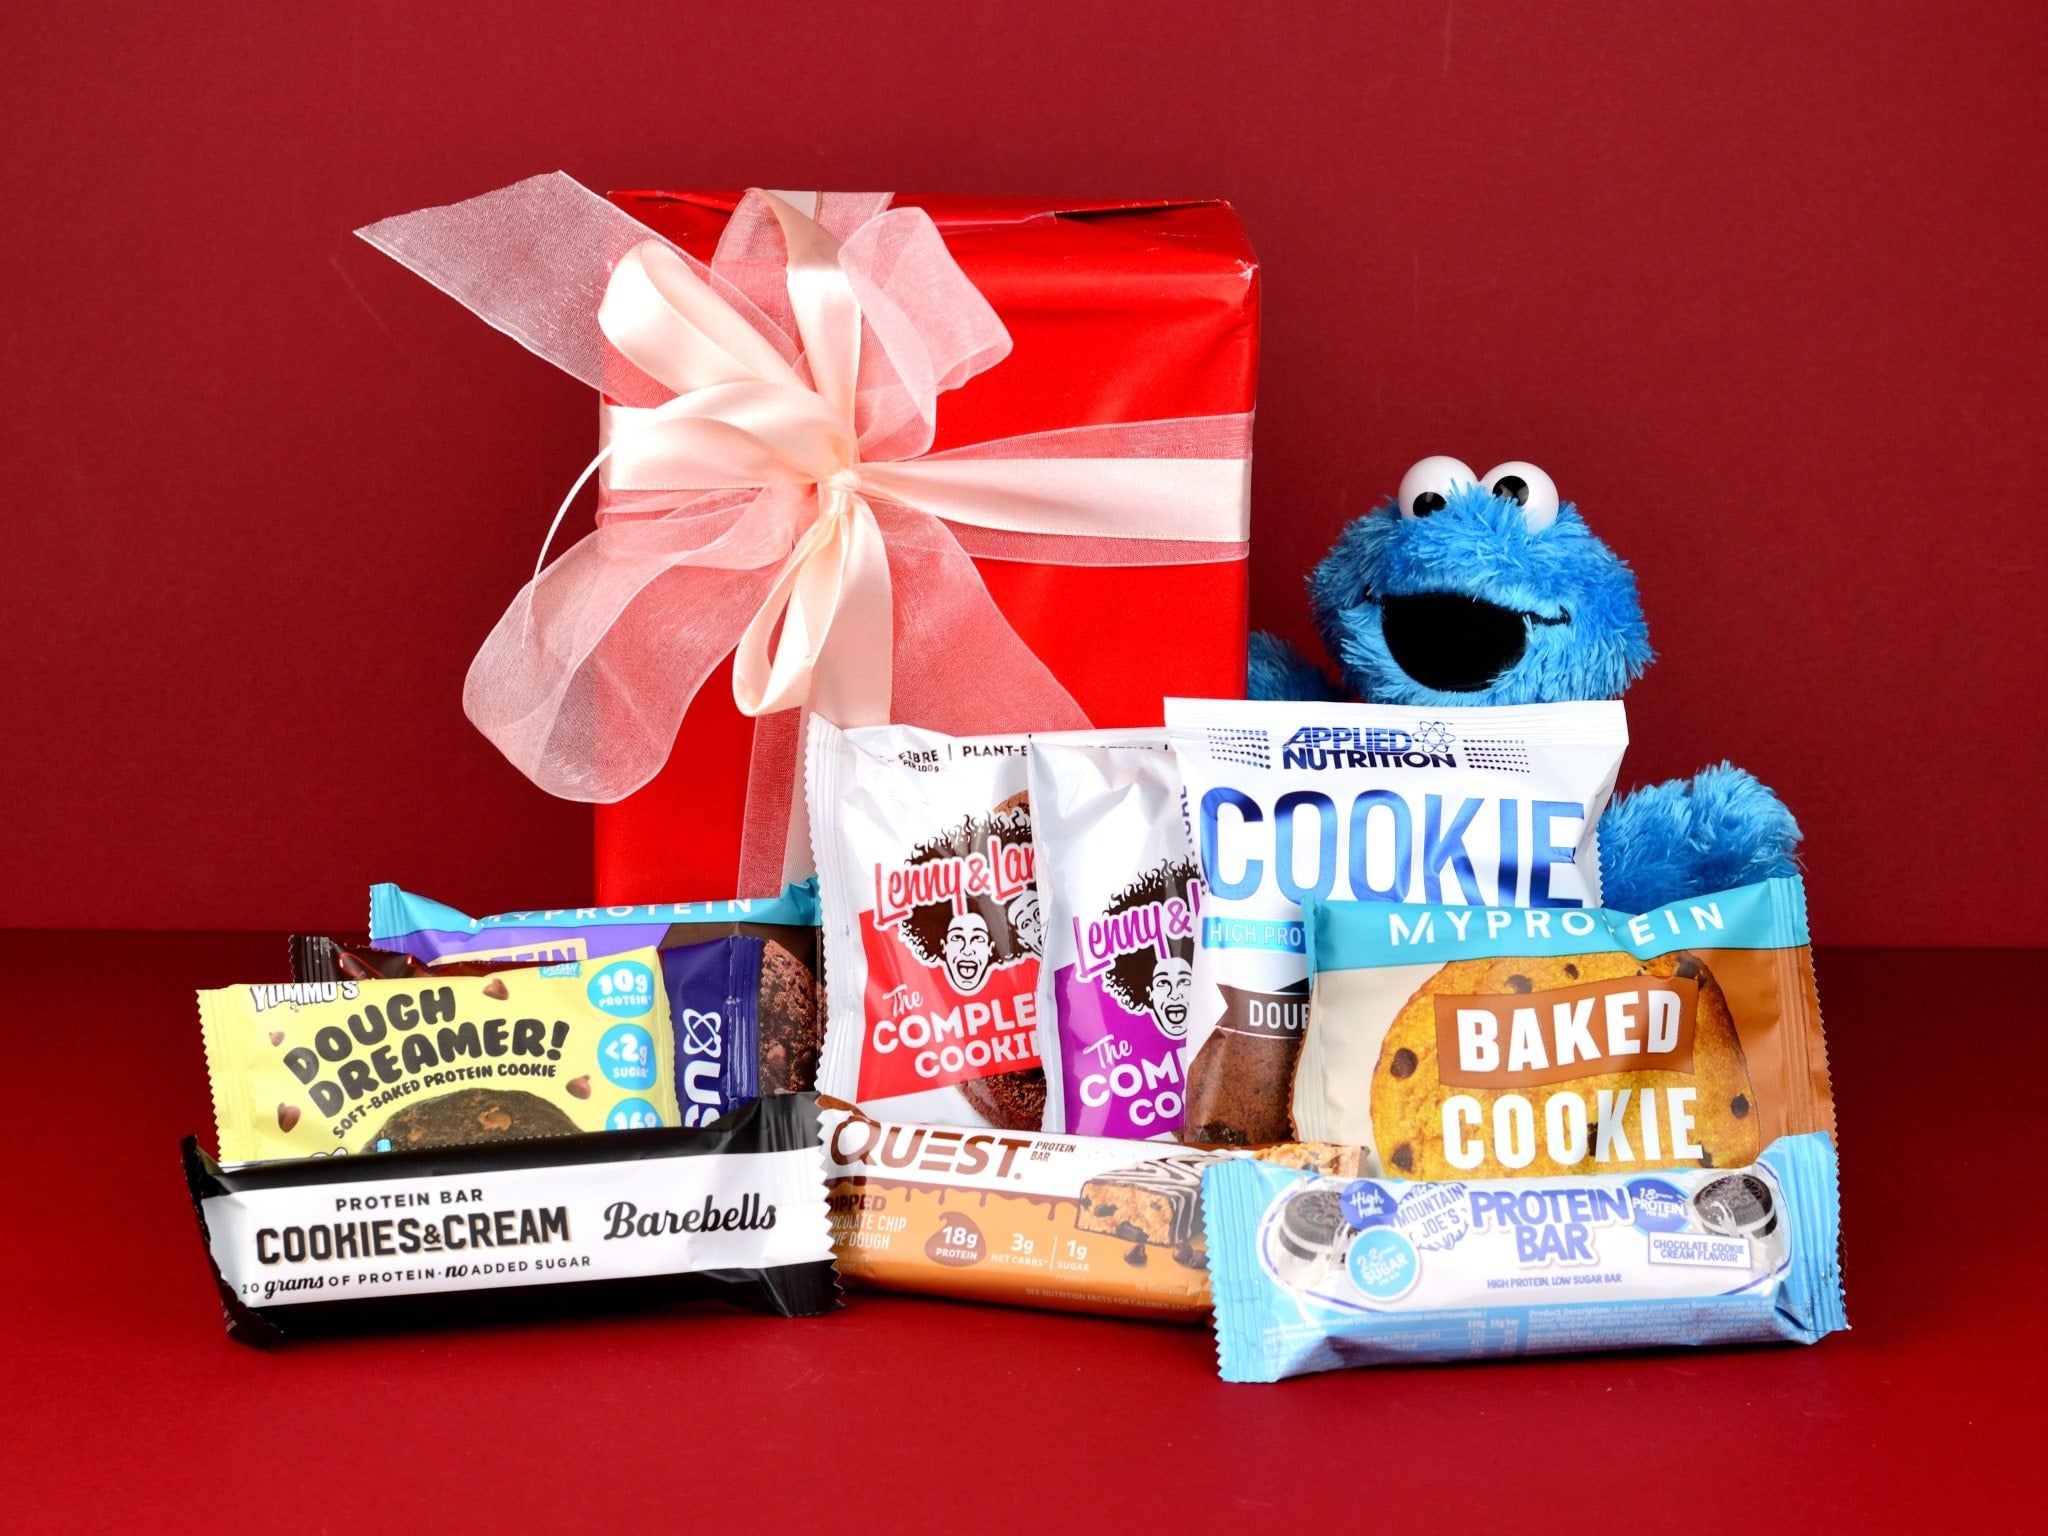 Box Of Protein | Gym Gift | Protein Indulgence Cookie Monster Gift Box | Protein Snacks Hamper | Yummos, MyProtein, Barebell, Lenny & Larrys, Locako, Quest, USN, Mountain Joe